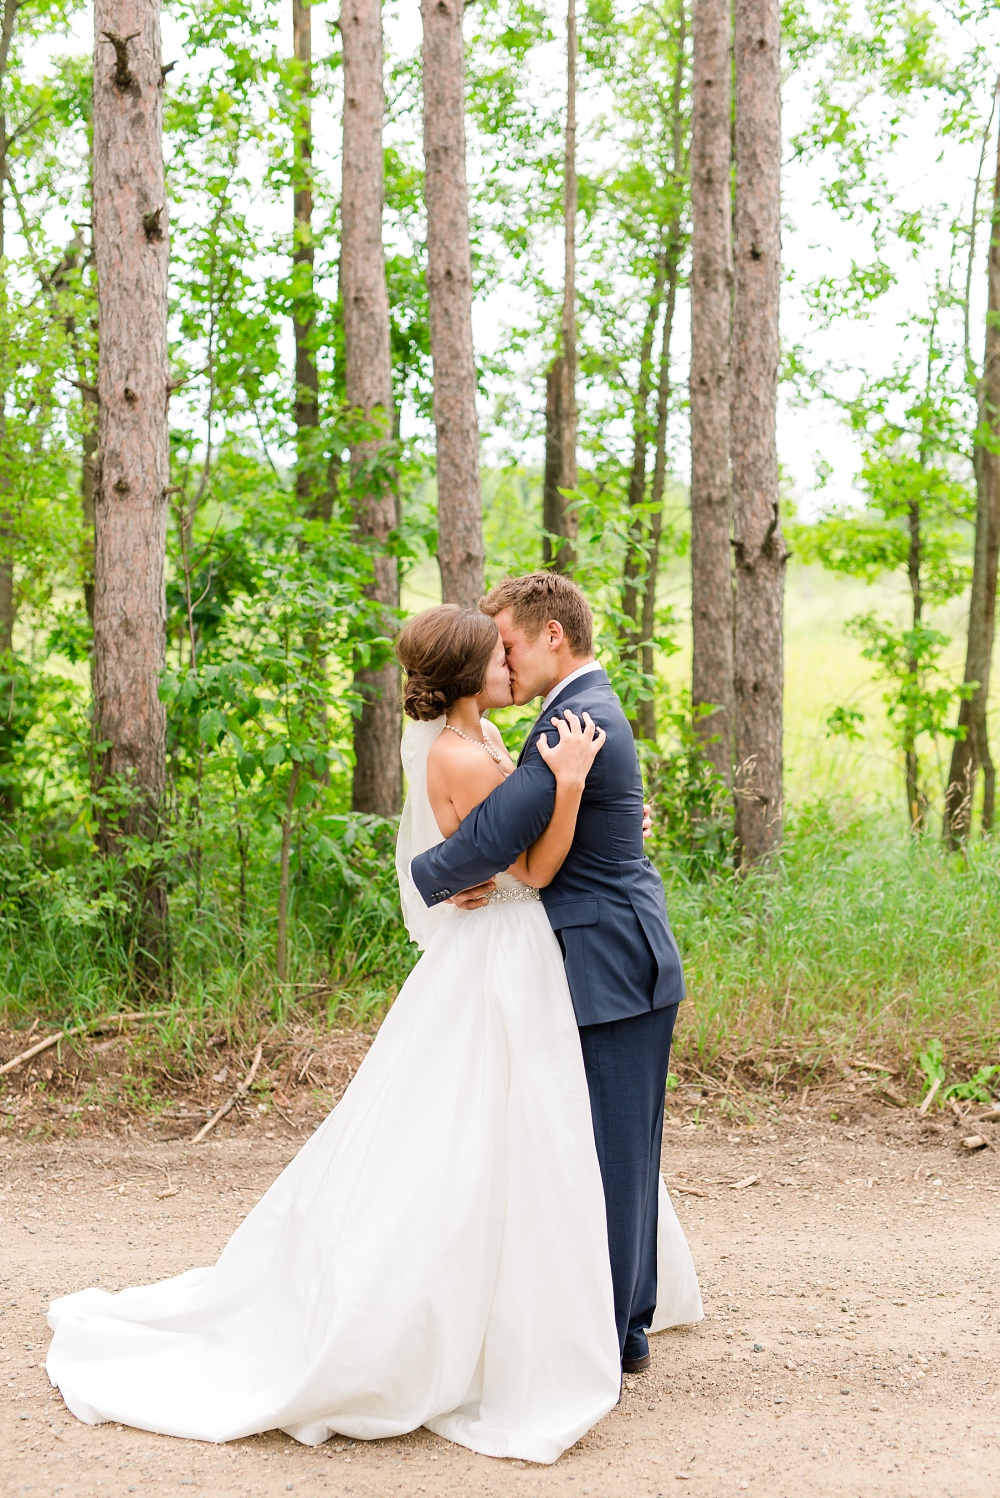 Wolf Lake, MN Country Styled Wedding, White Dress, Blue Suite | Photographed by Amber Langerud Photography | Bride and Groom Hugging after first look